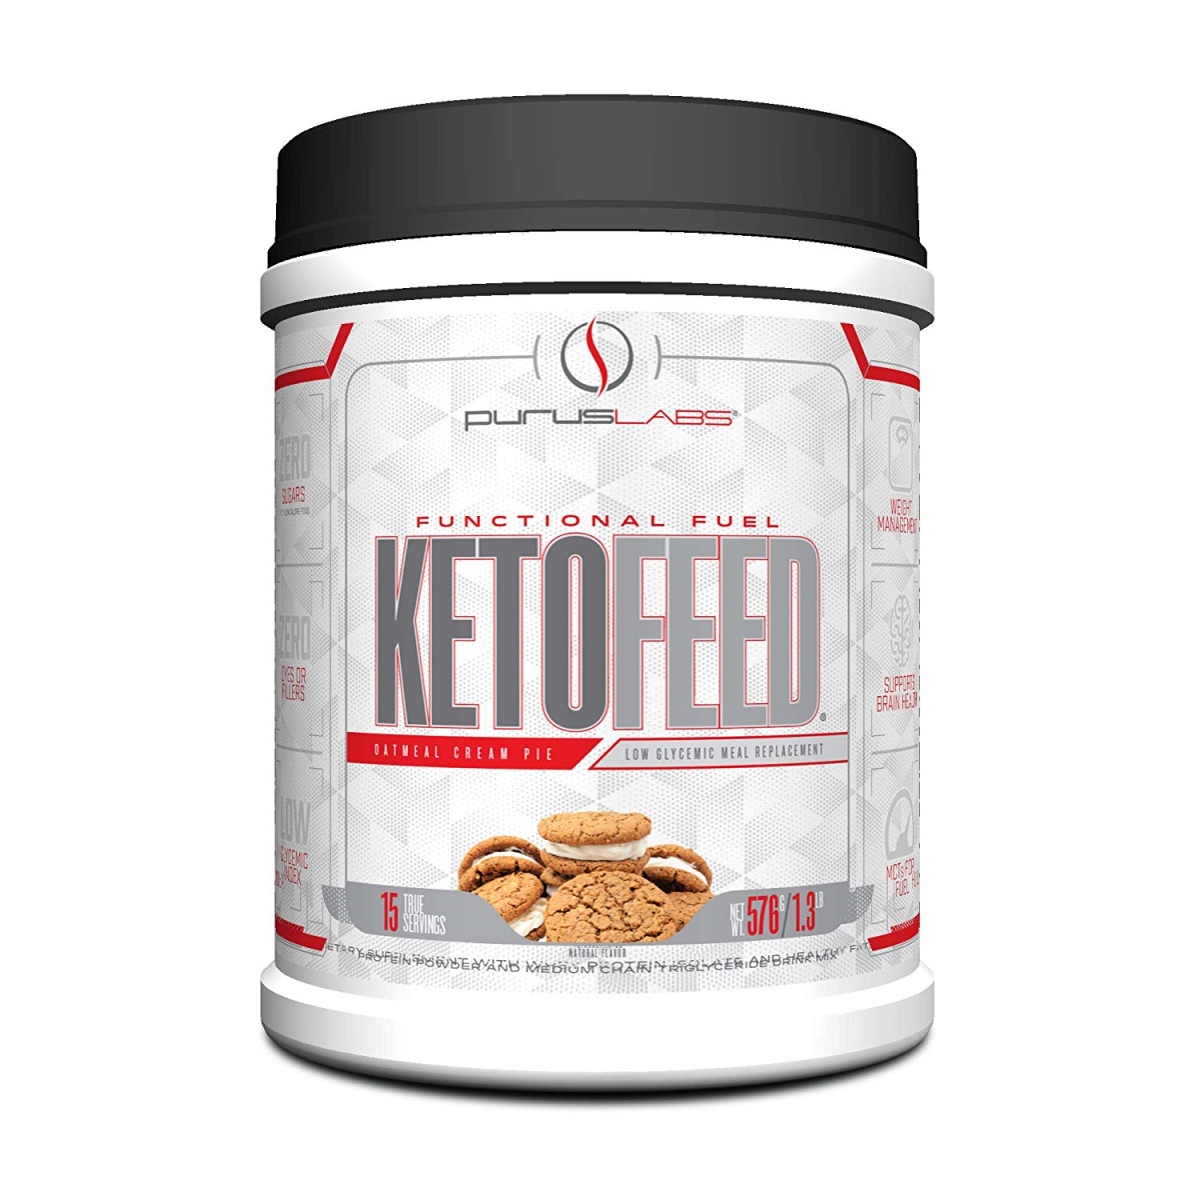 7330064 Ketofeed Replacement Shake For Clean Food, Oatmeal Cream Pie - 15 Servings